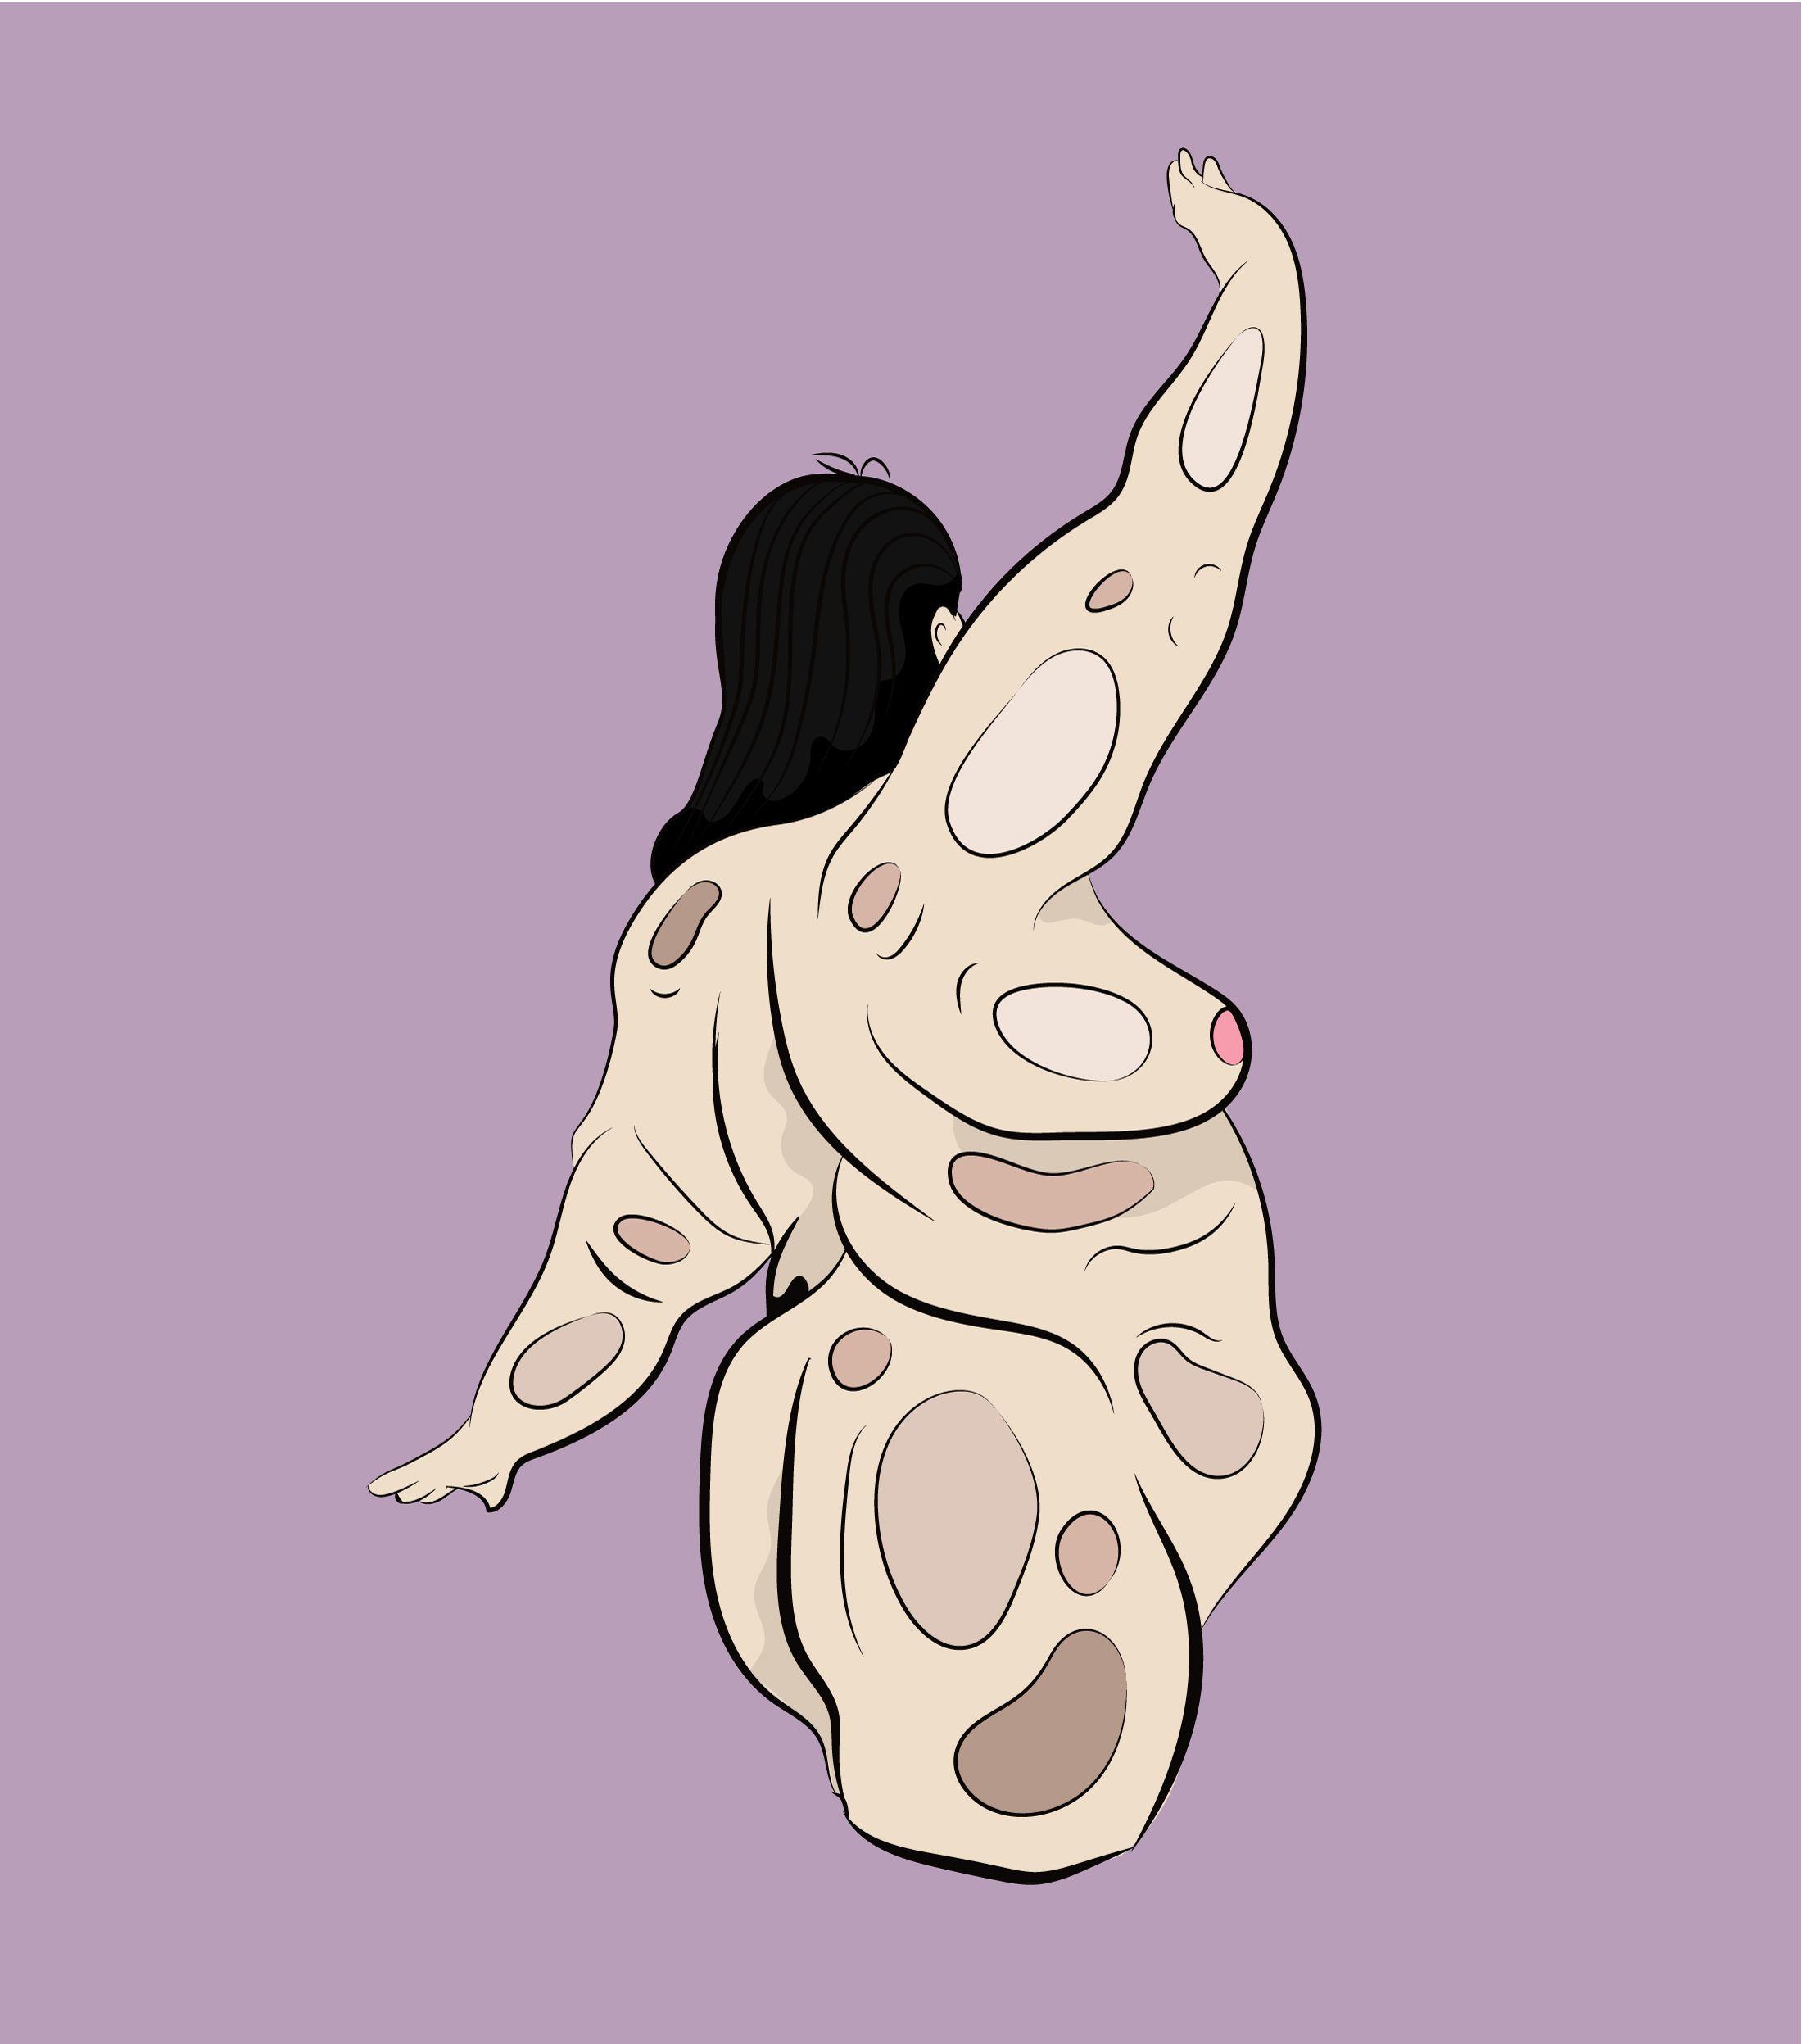 Digital art of a female, obese nude dancing with her back to us. One arm raised to the sky as if striking a pose. The vector illustration is set against a pastel purple background.